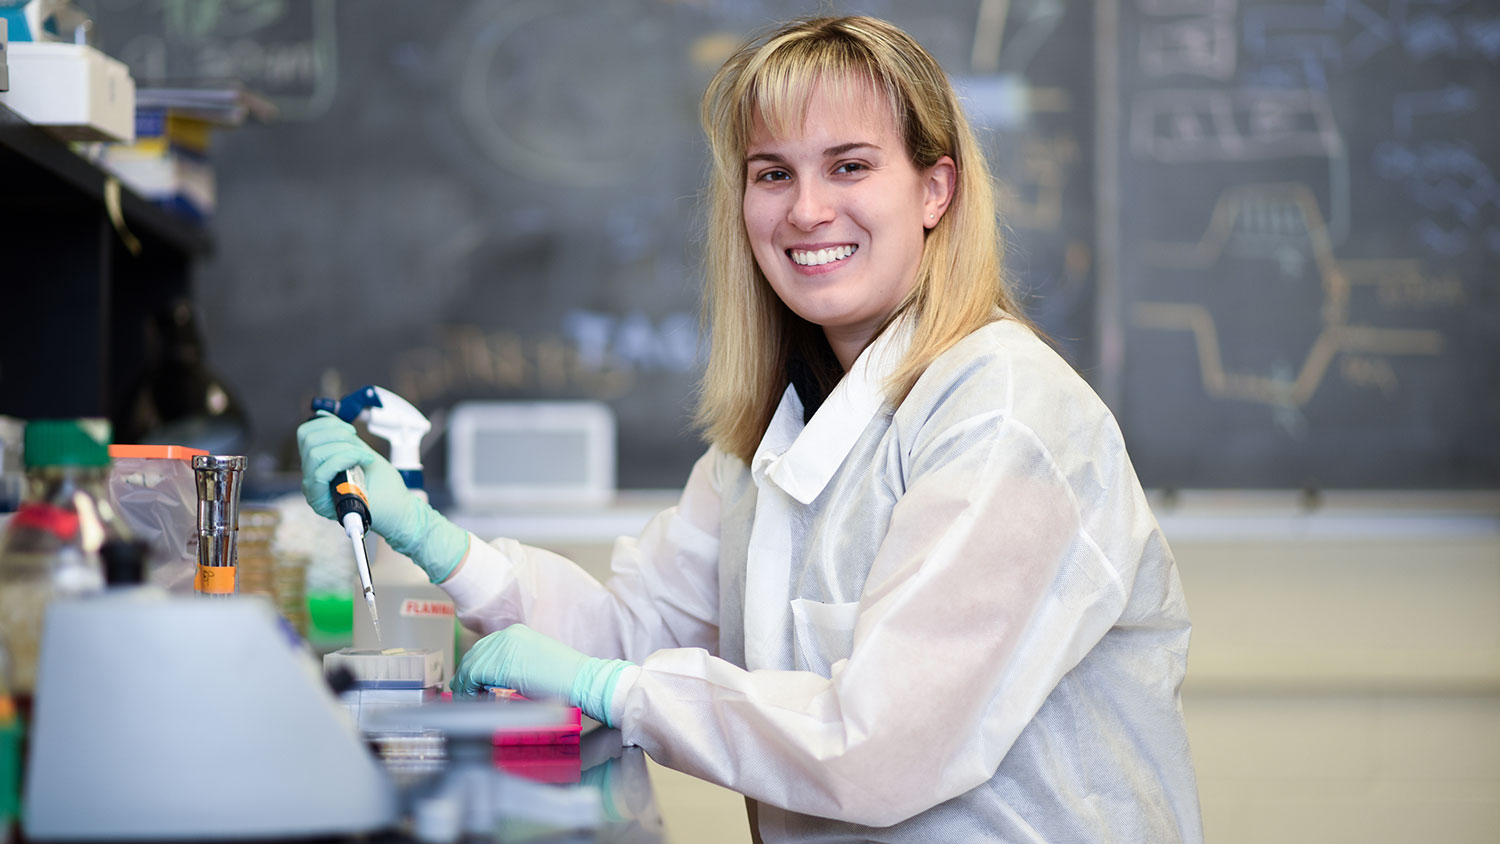 NC State doctoral student Katelyn Brandt working in a lab